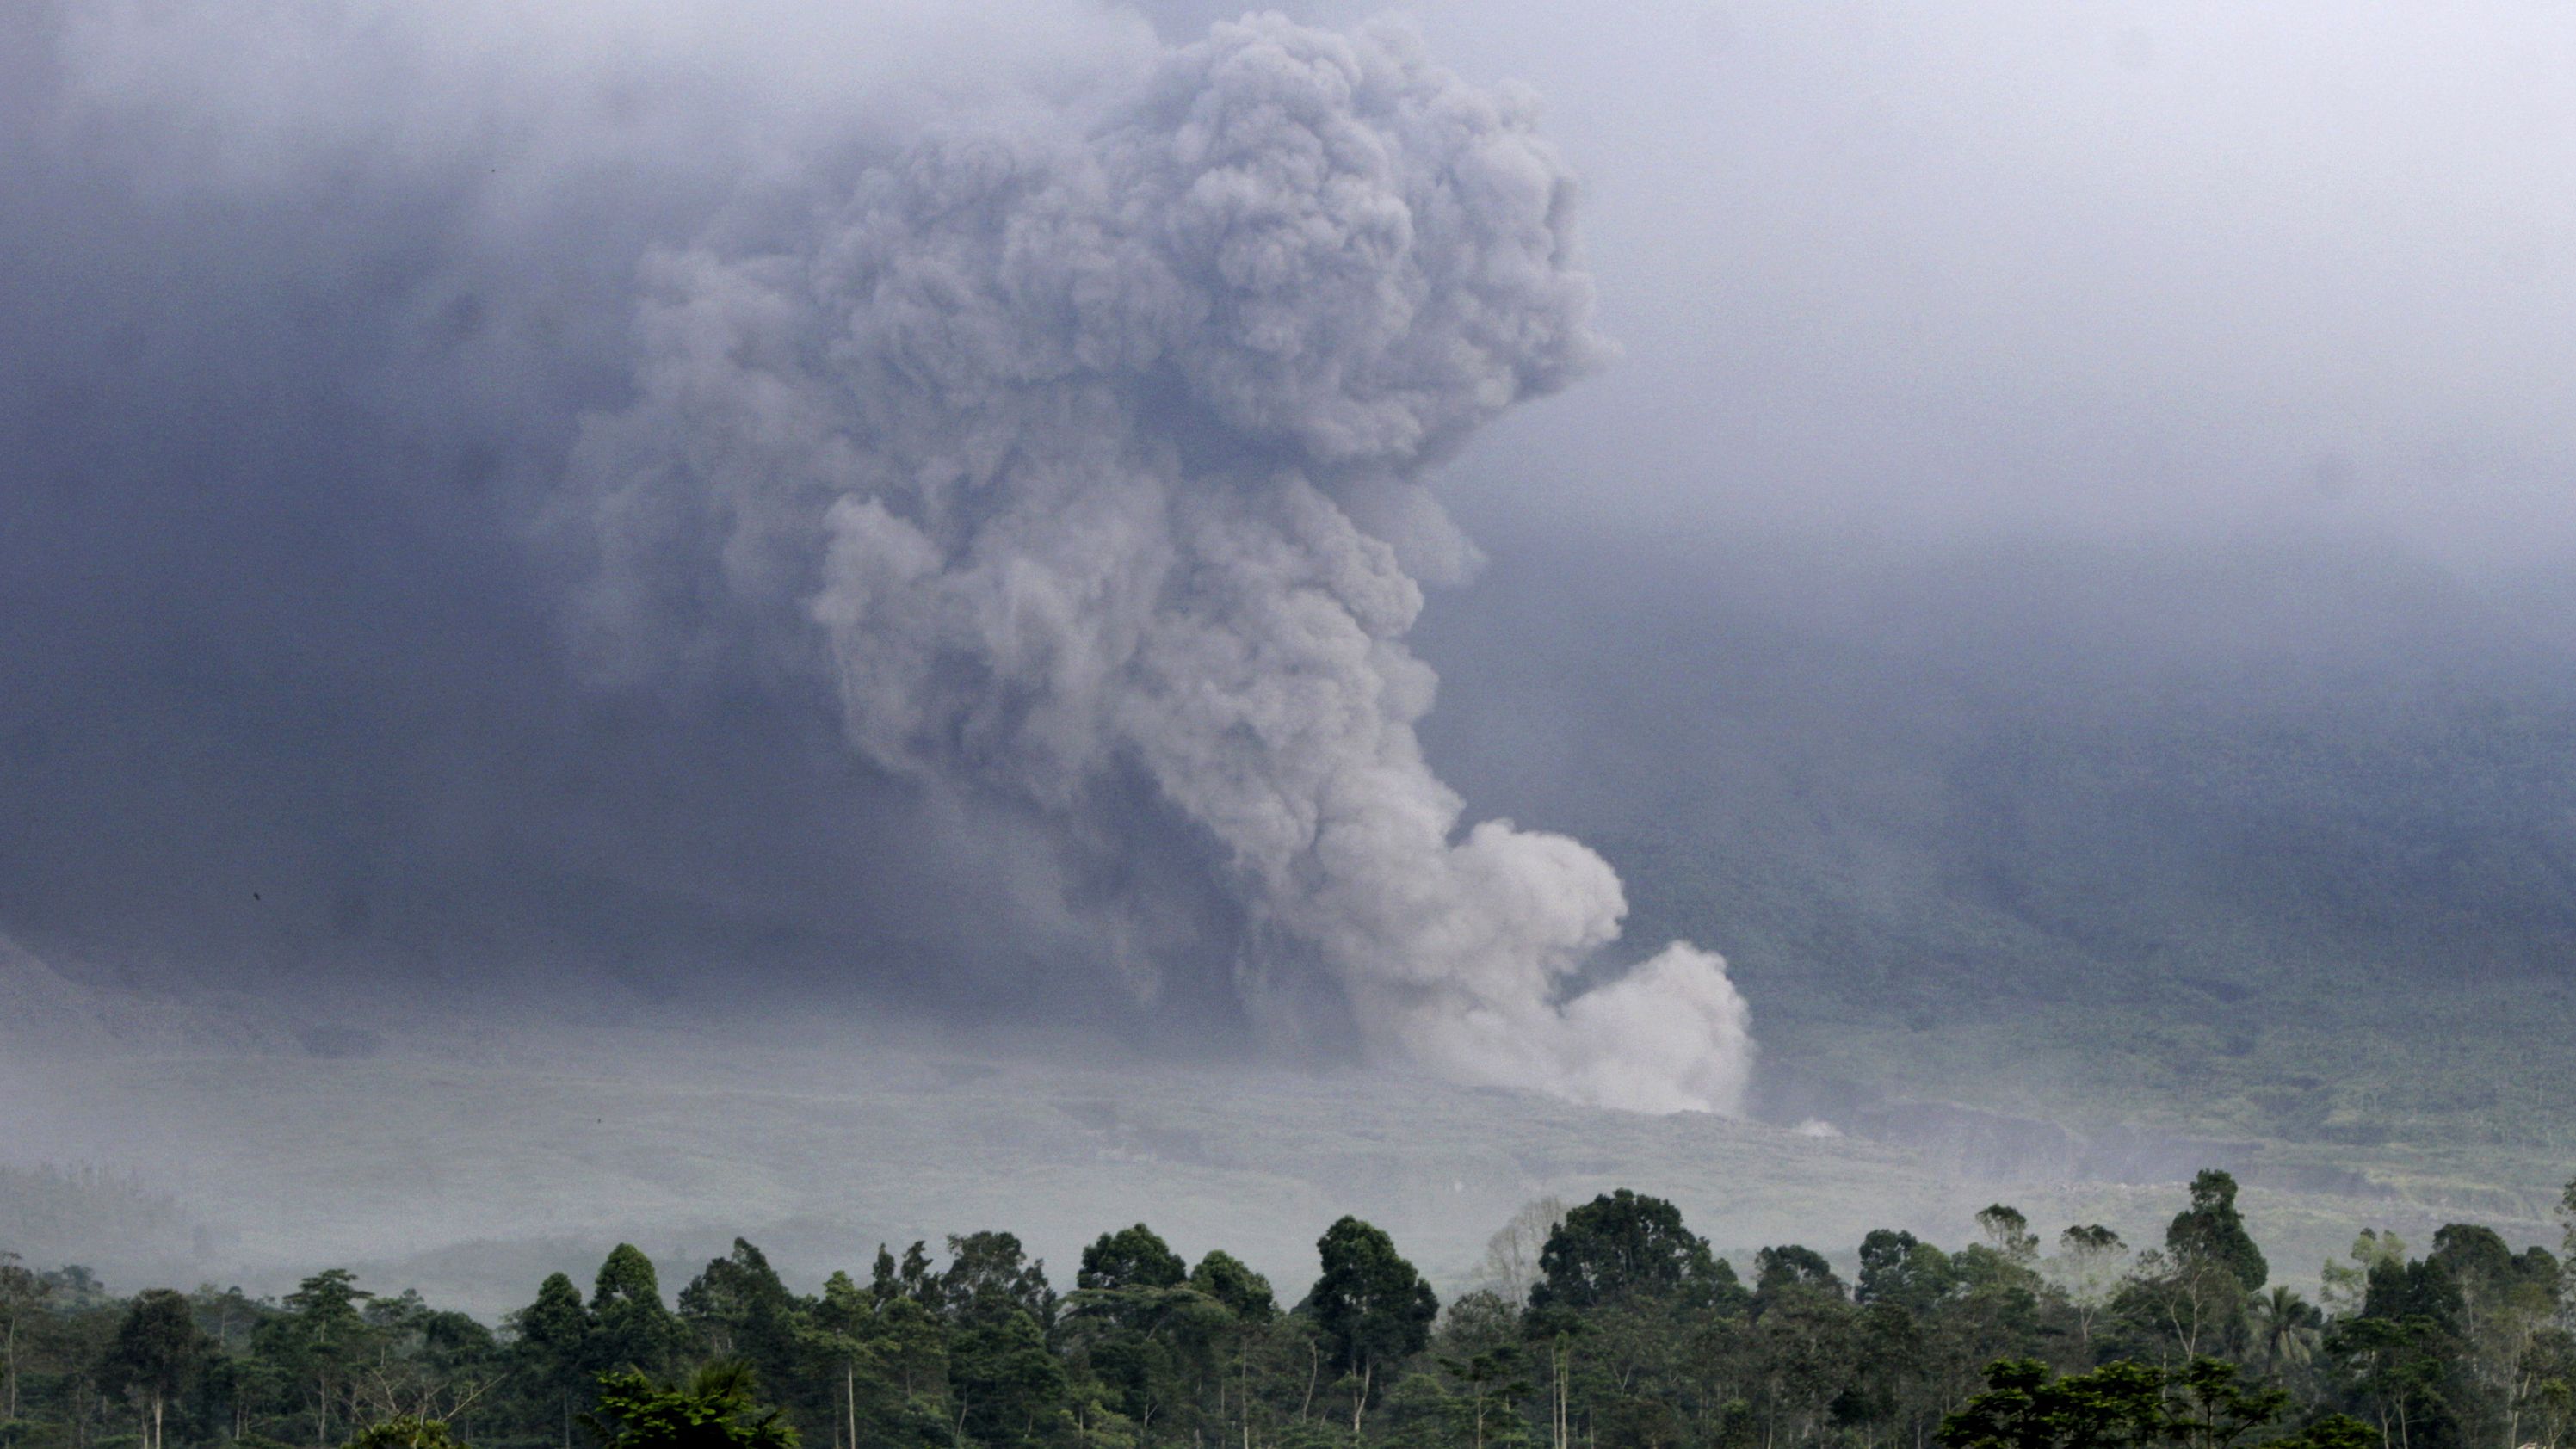 Pyroclastic flow rolls down the slope of Mount Semeru during an eruption in Lumajang, East Java.